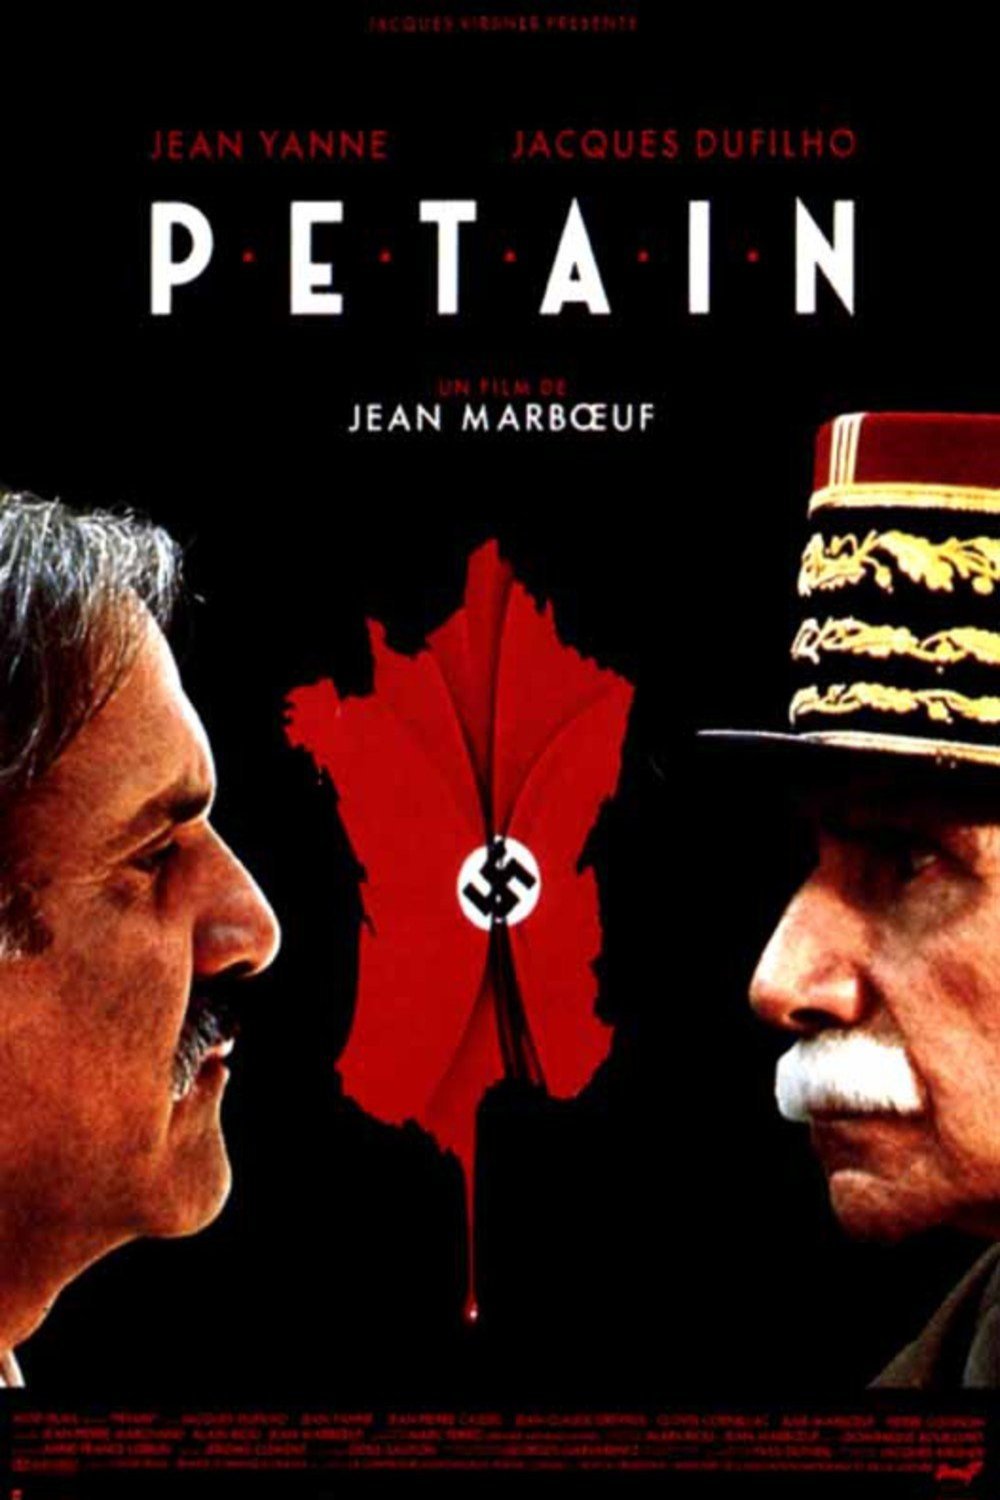 Poster of the movie Pétain